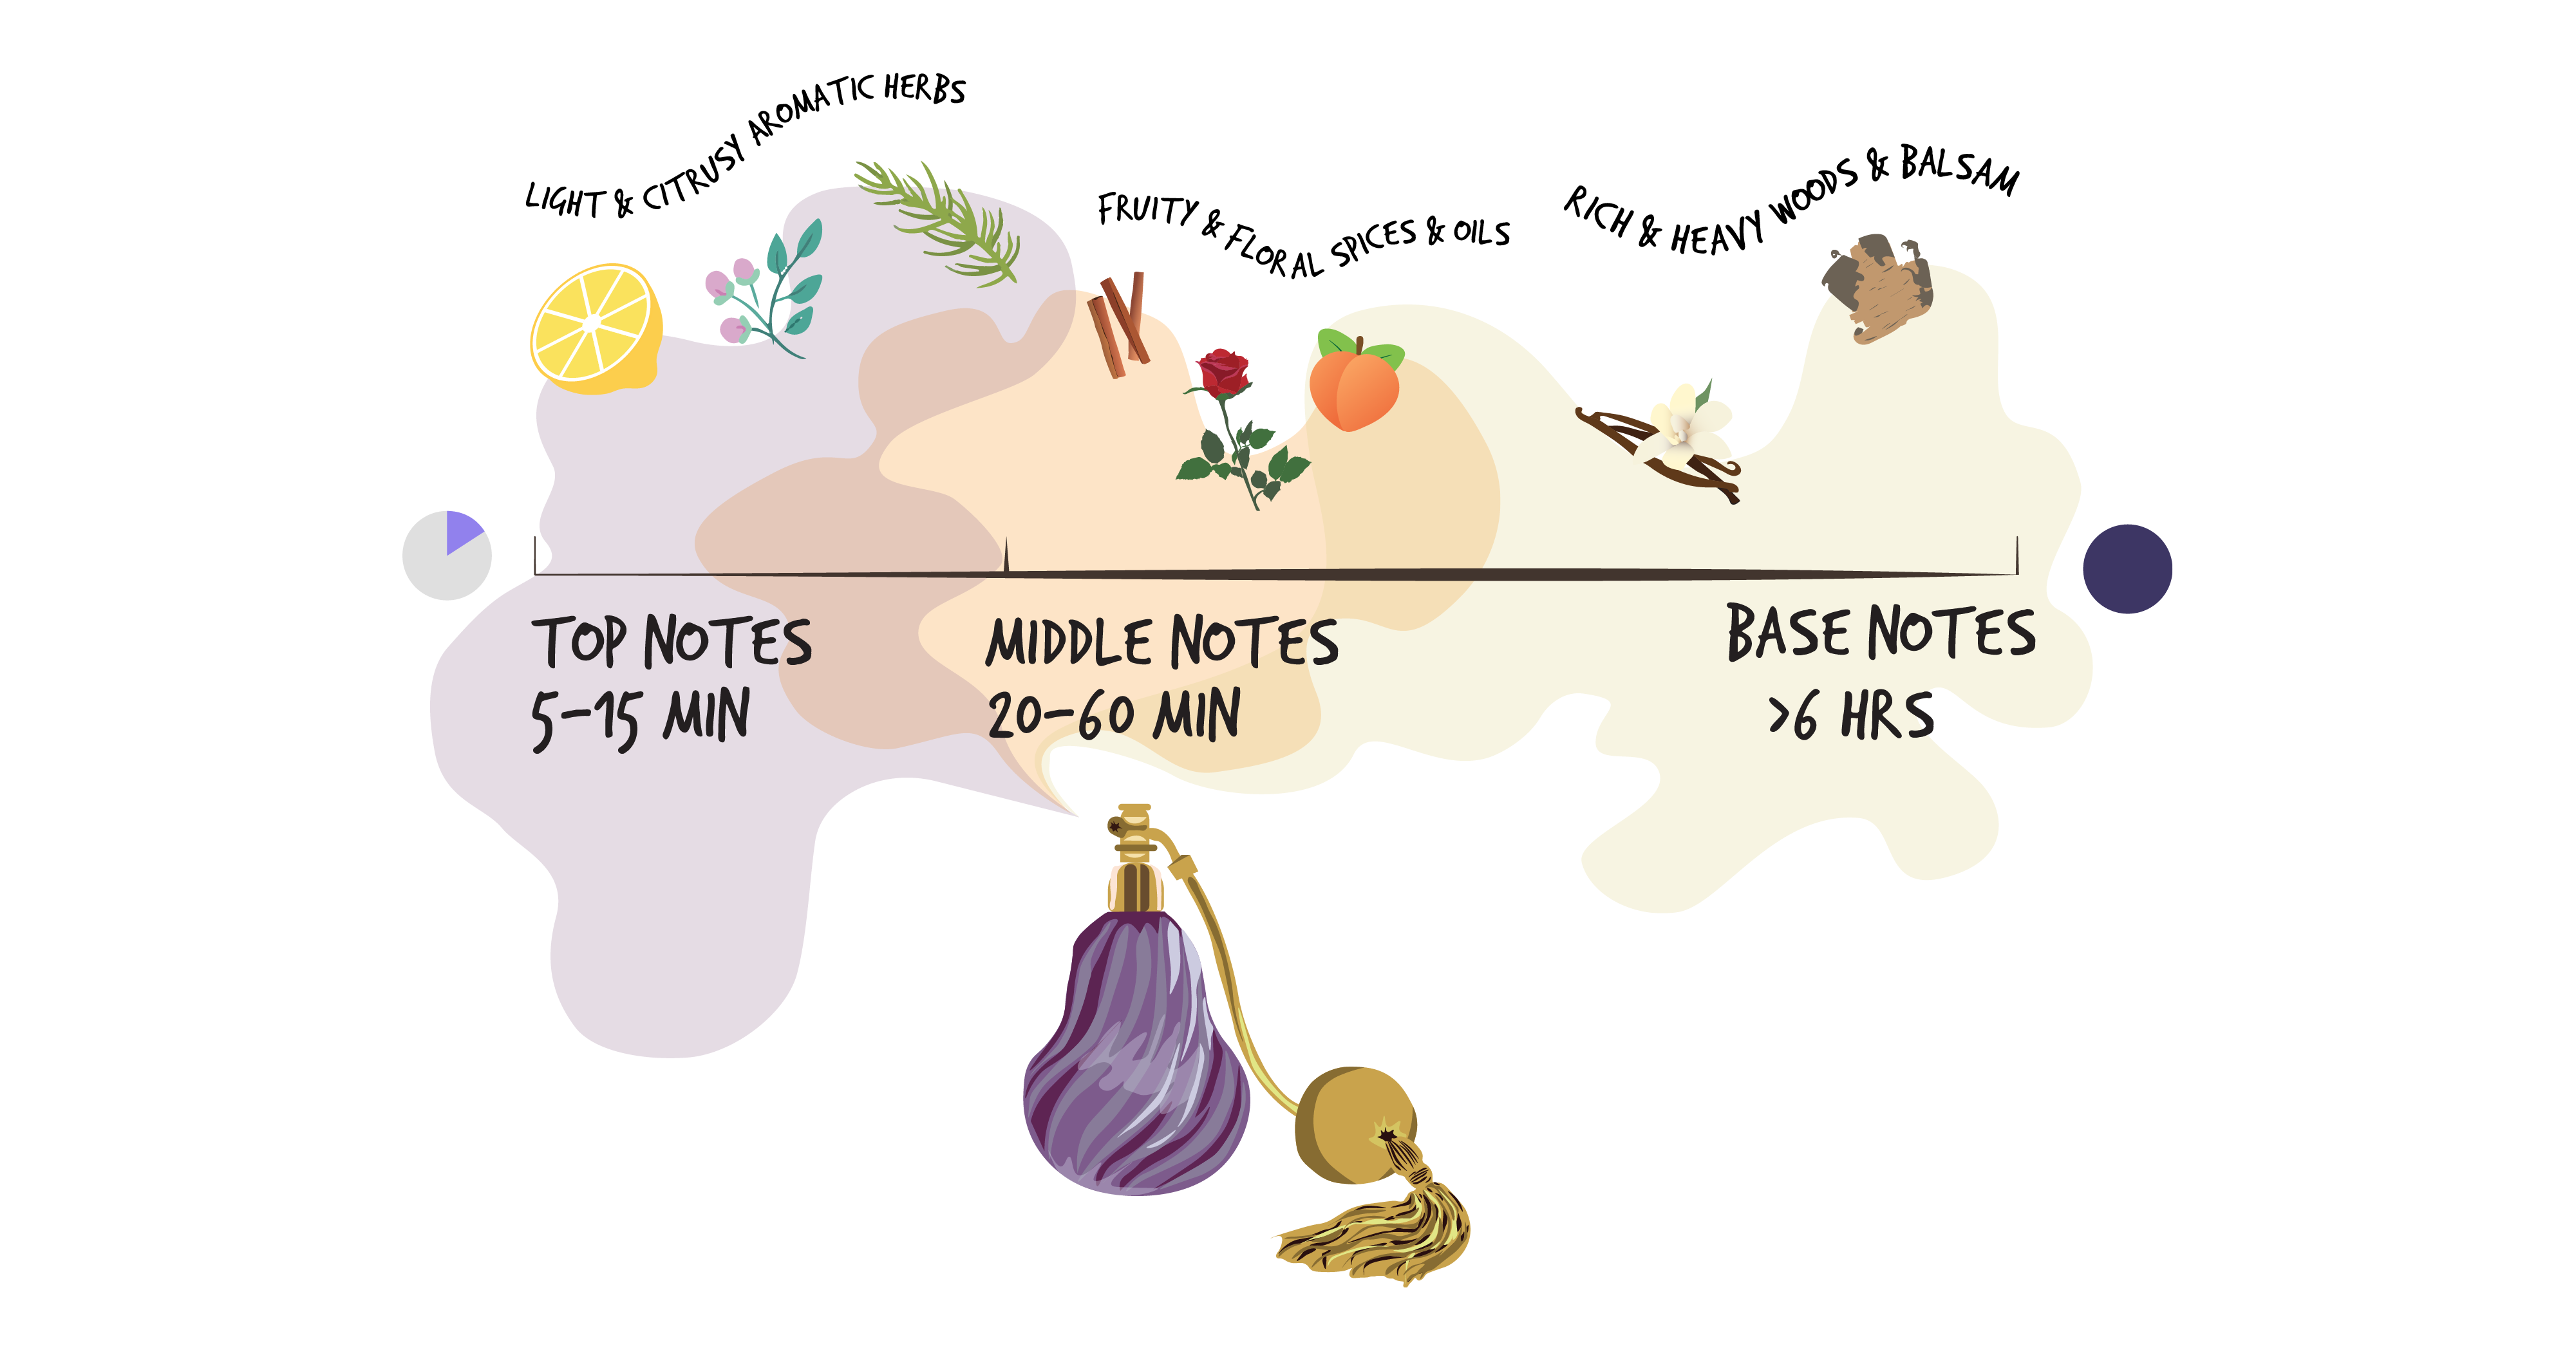 A scale from with Time and Note type goes from Top Notes, 5-15 minutes on the left, to Middle Notes, 20-60 minutes in the center, to Base Notes, over 6 hours on the right. Underneath is a purple perfume bottle. On top of the scale, between Top Notes and Middle Notes is a lemon, a flower, and a branch with text: Light and citrusy aromatic herbs. Next to it, around the middle of the scale, is a cinnamon stick, a rose, and a peach with text: Fruity and floral spices and oils. On the right end of the scale is vanilla and balsam with text: Rich and heavy woods and balsam.